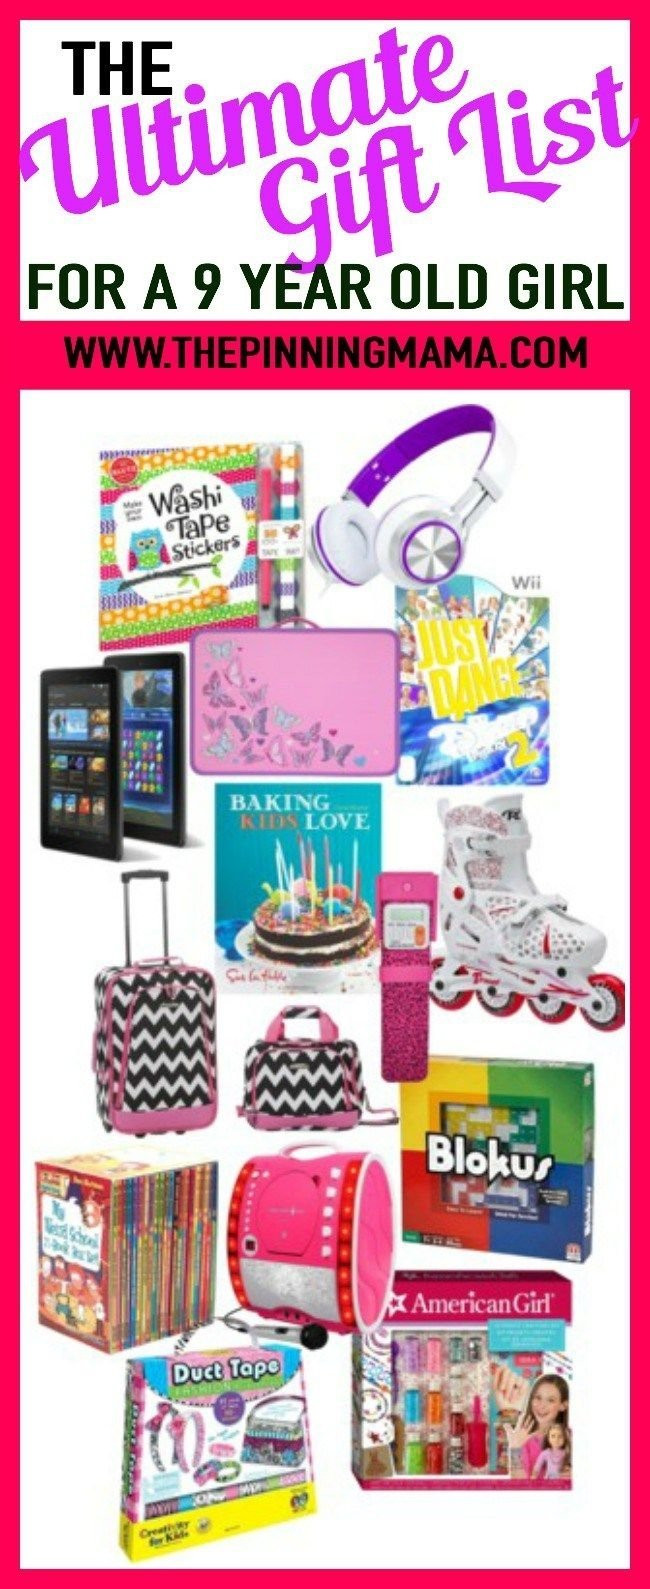 Girls Gift Ideas Age 9
 10 Lovable Gift Ideas For Girls Age 9 2020